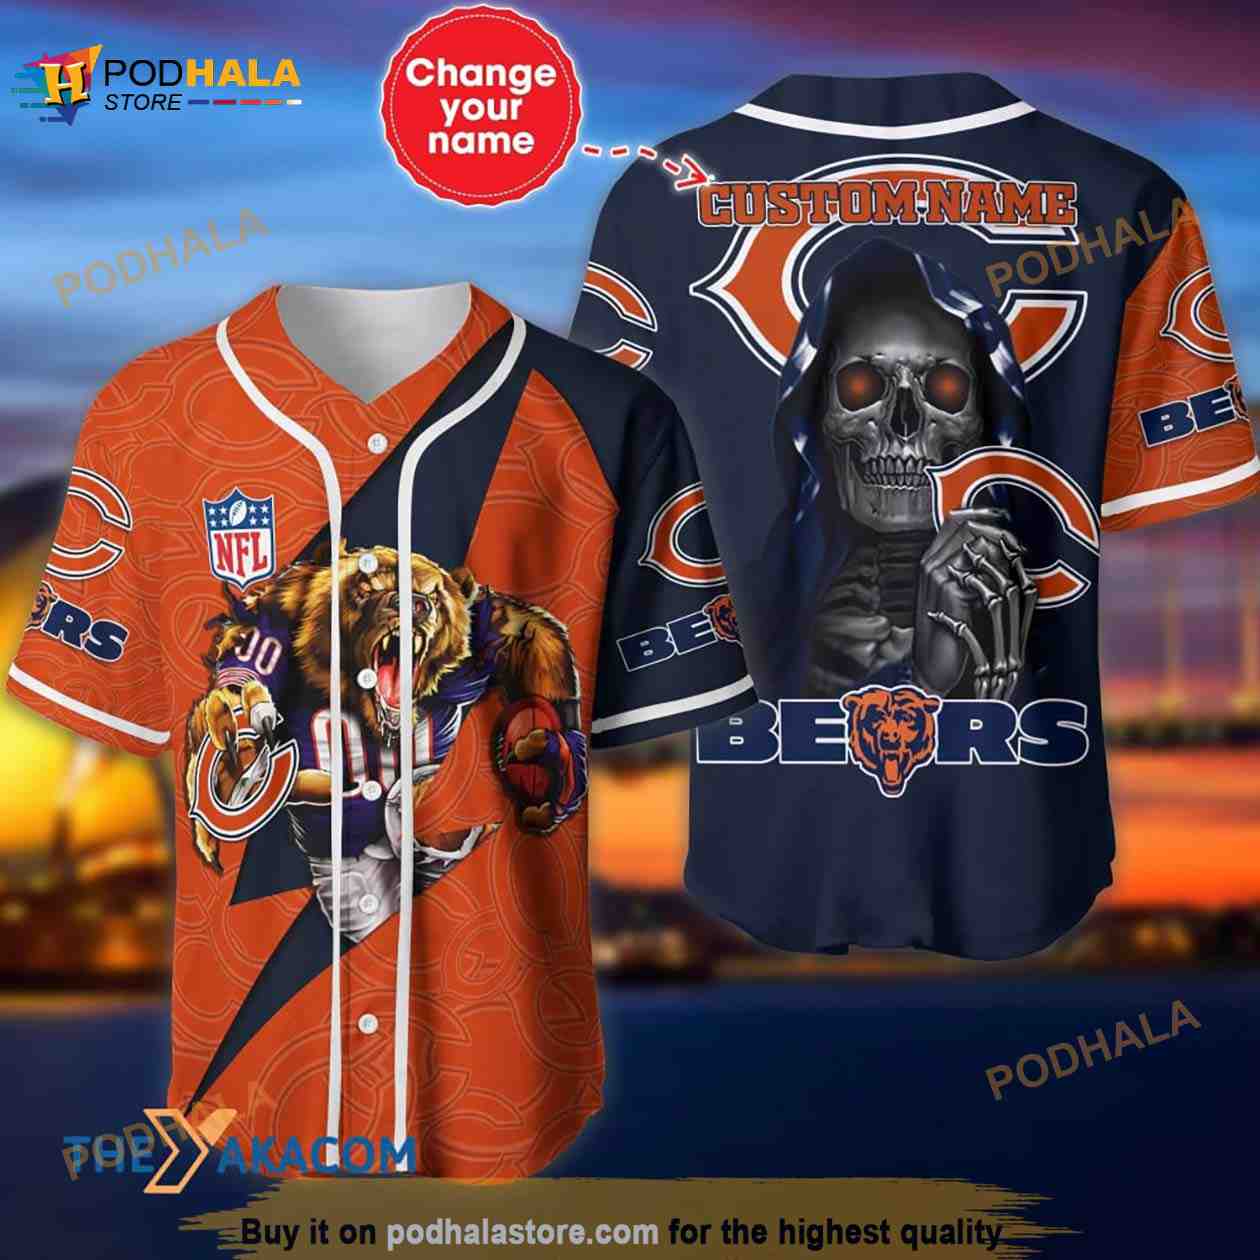 chicago bears jersey with your name